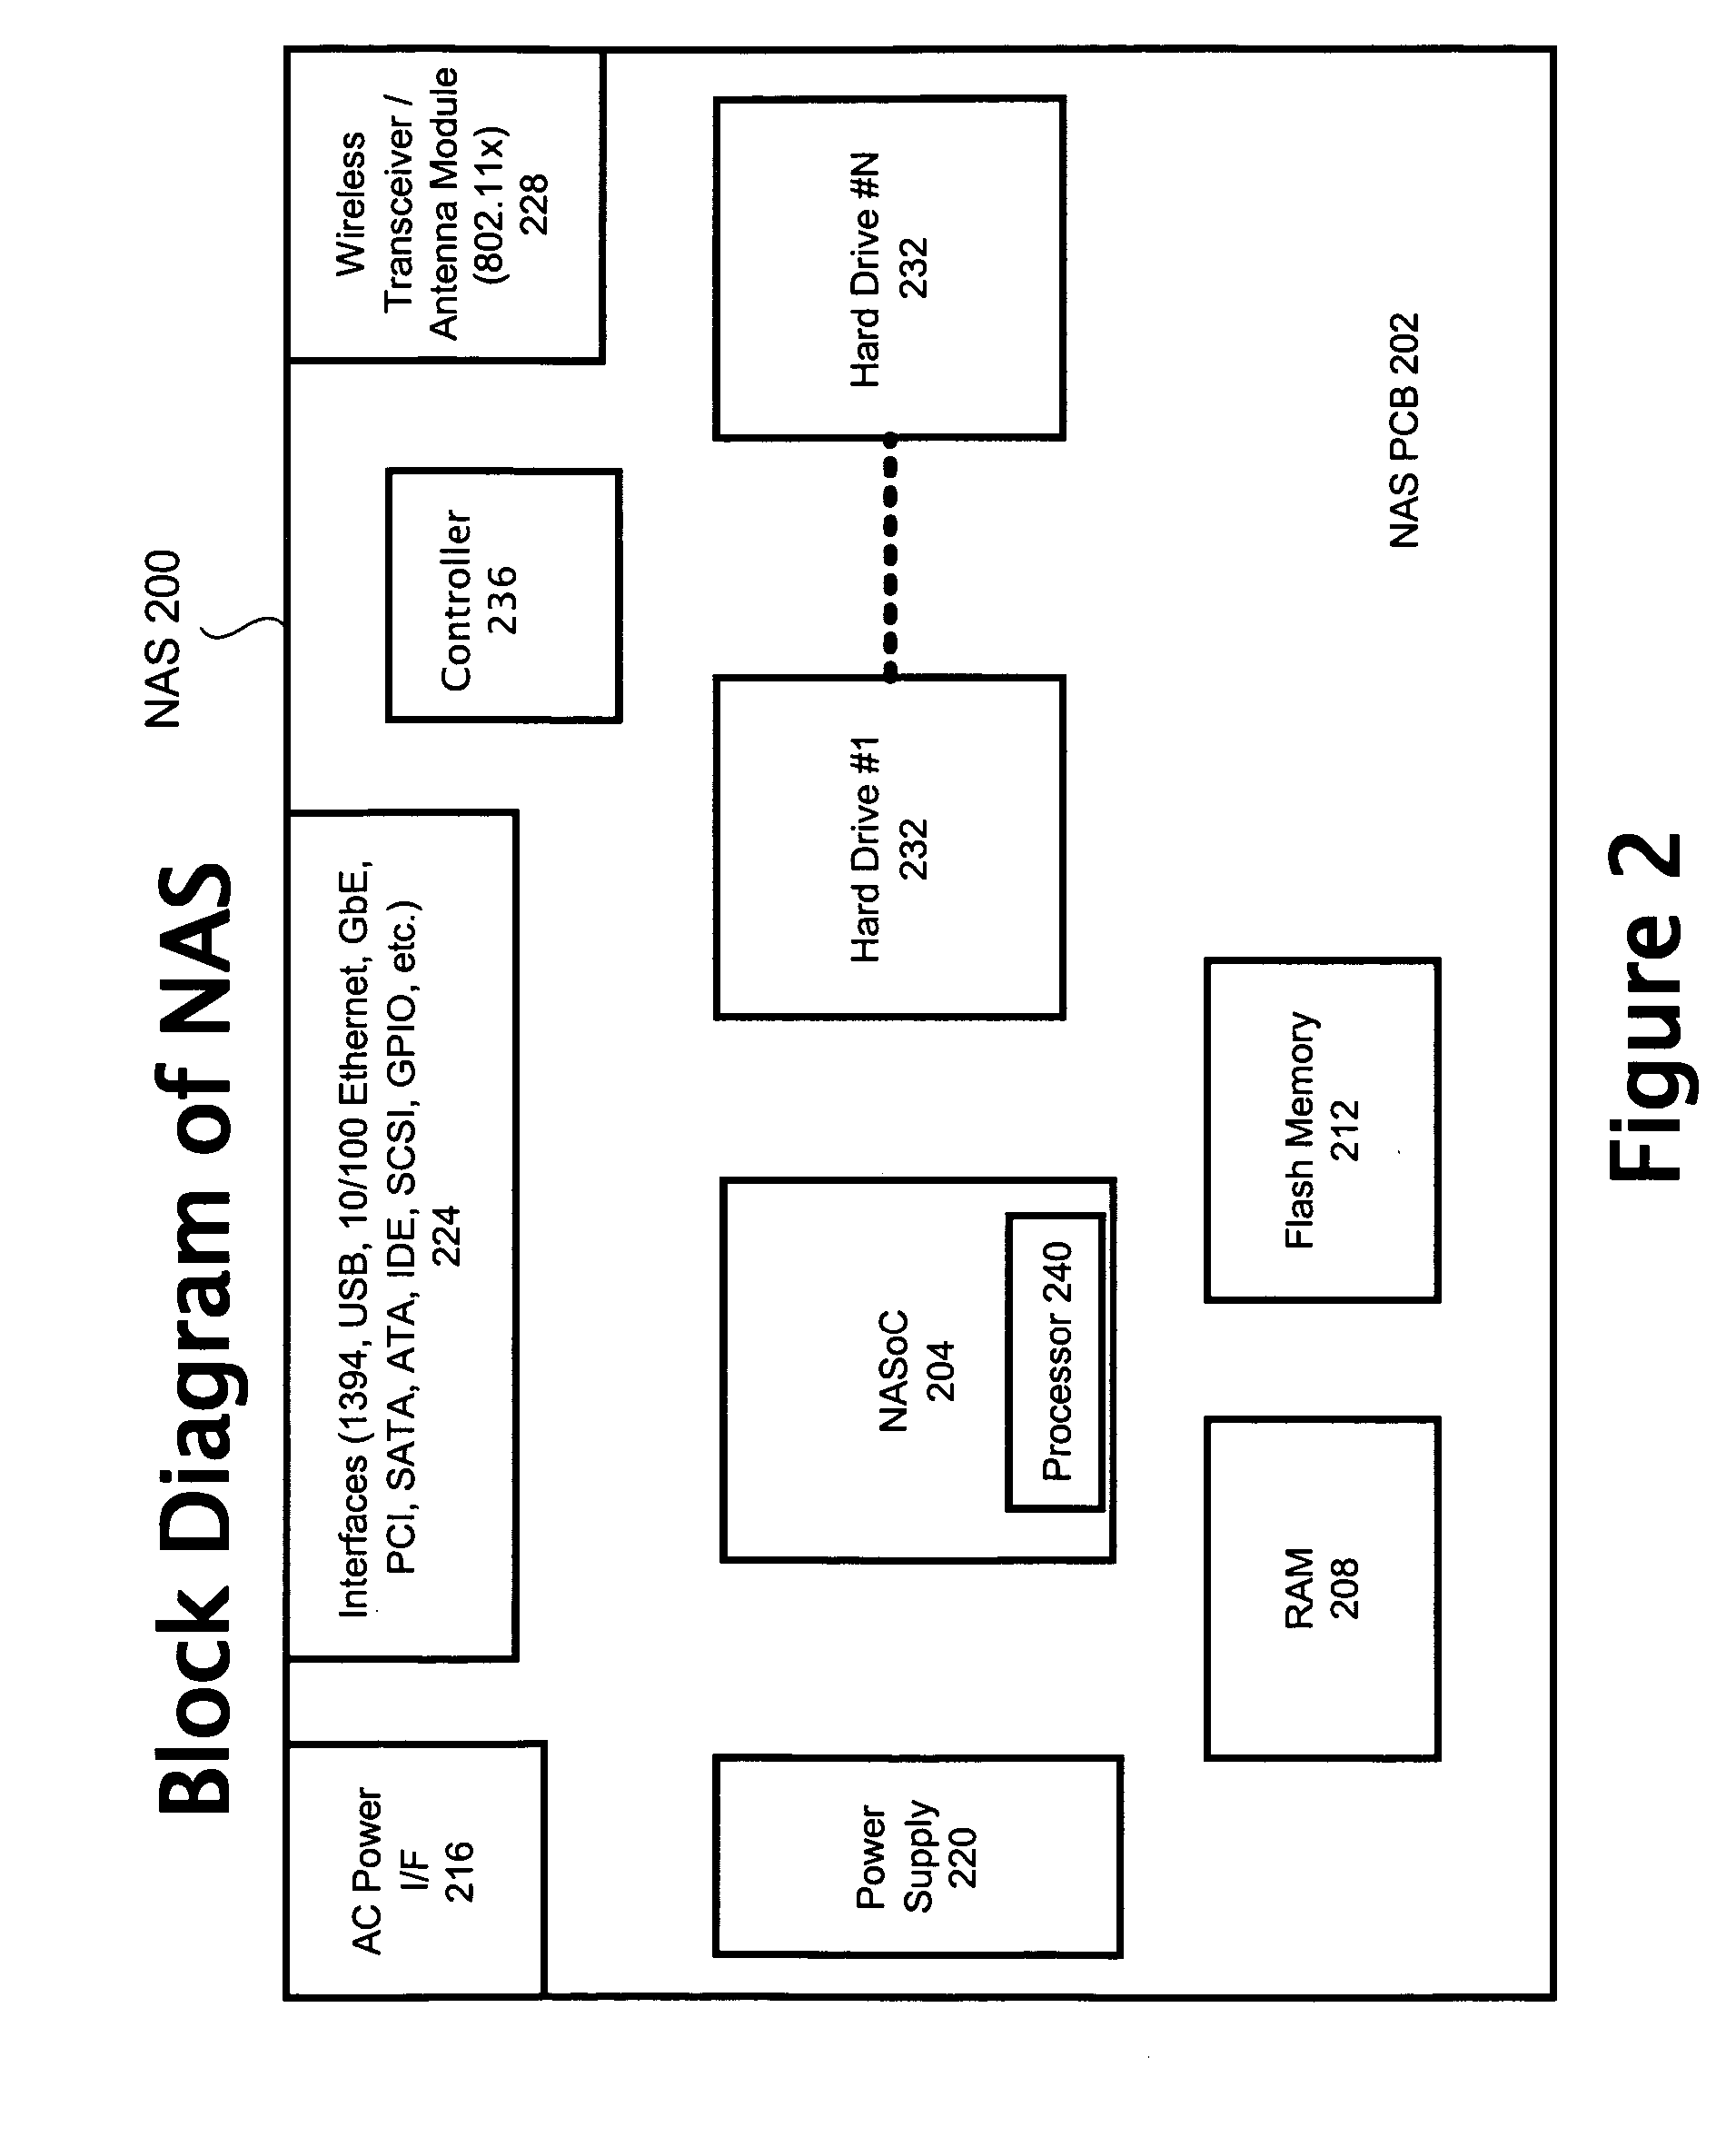 Automatic expansion of hard disk drive capacity in a storage device